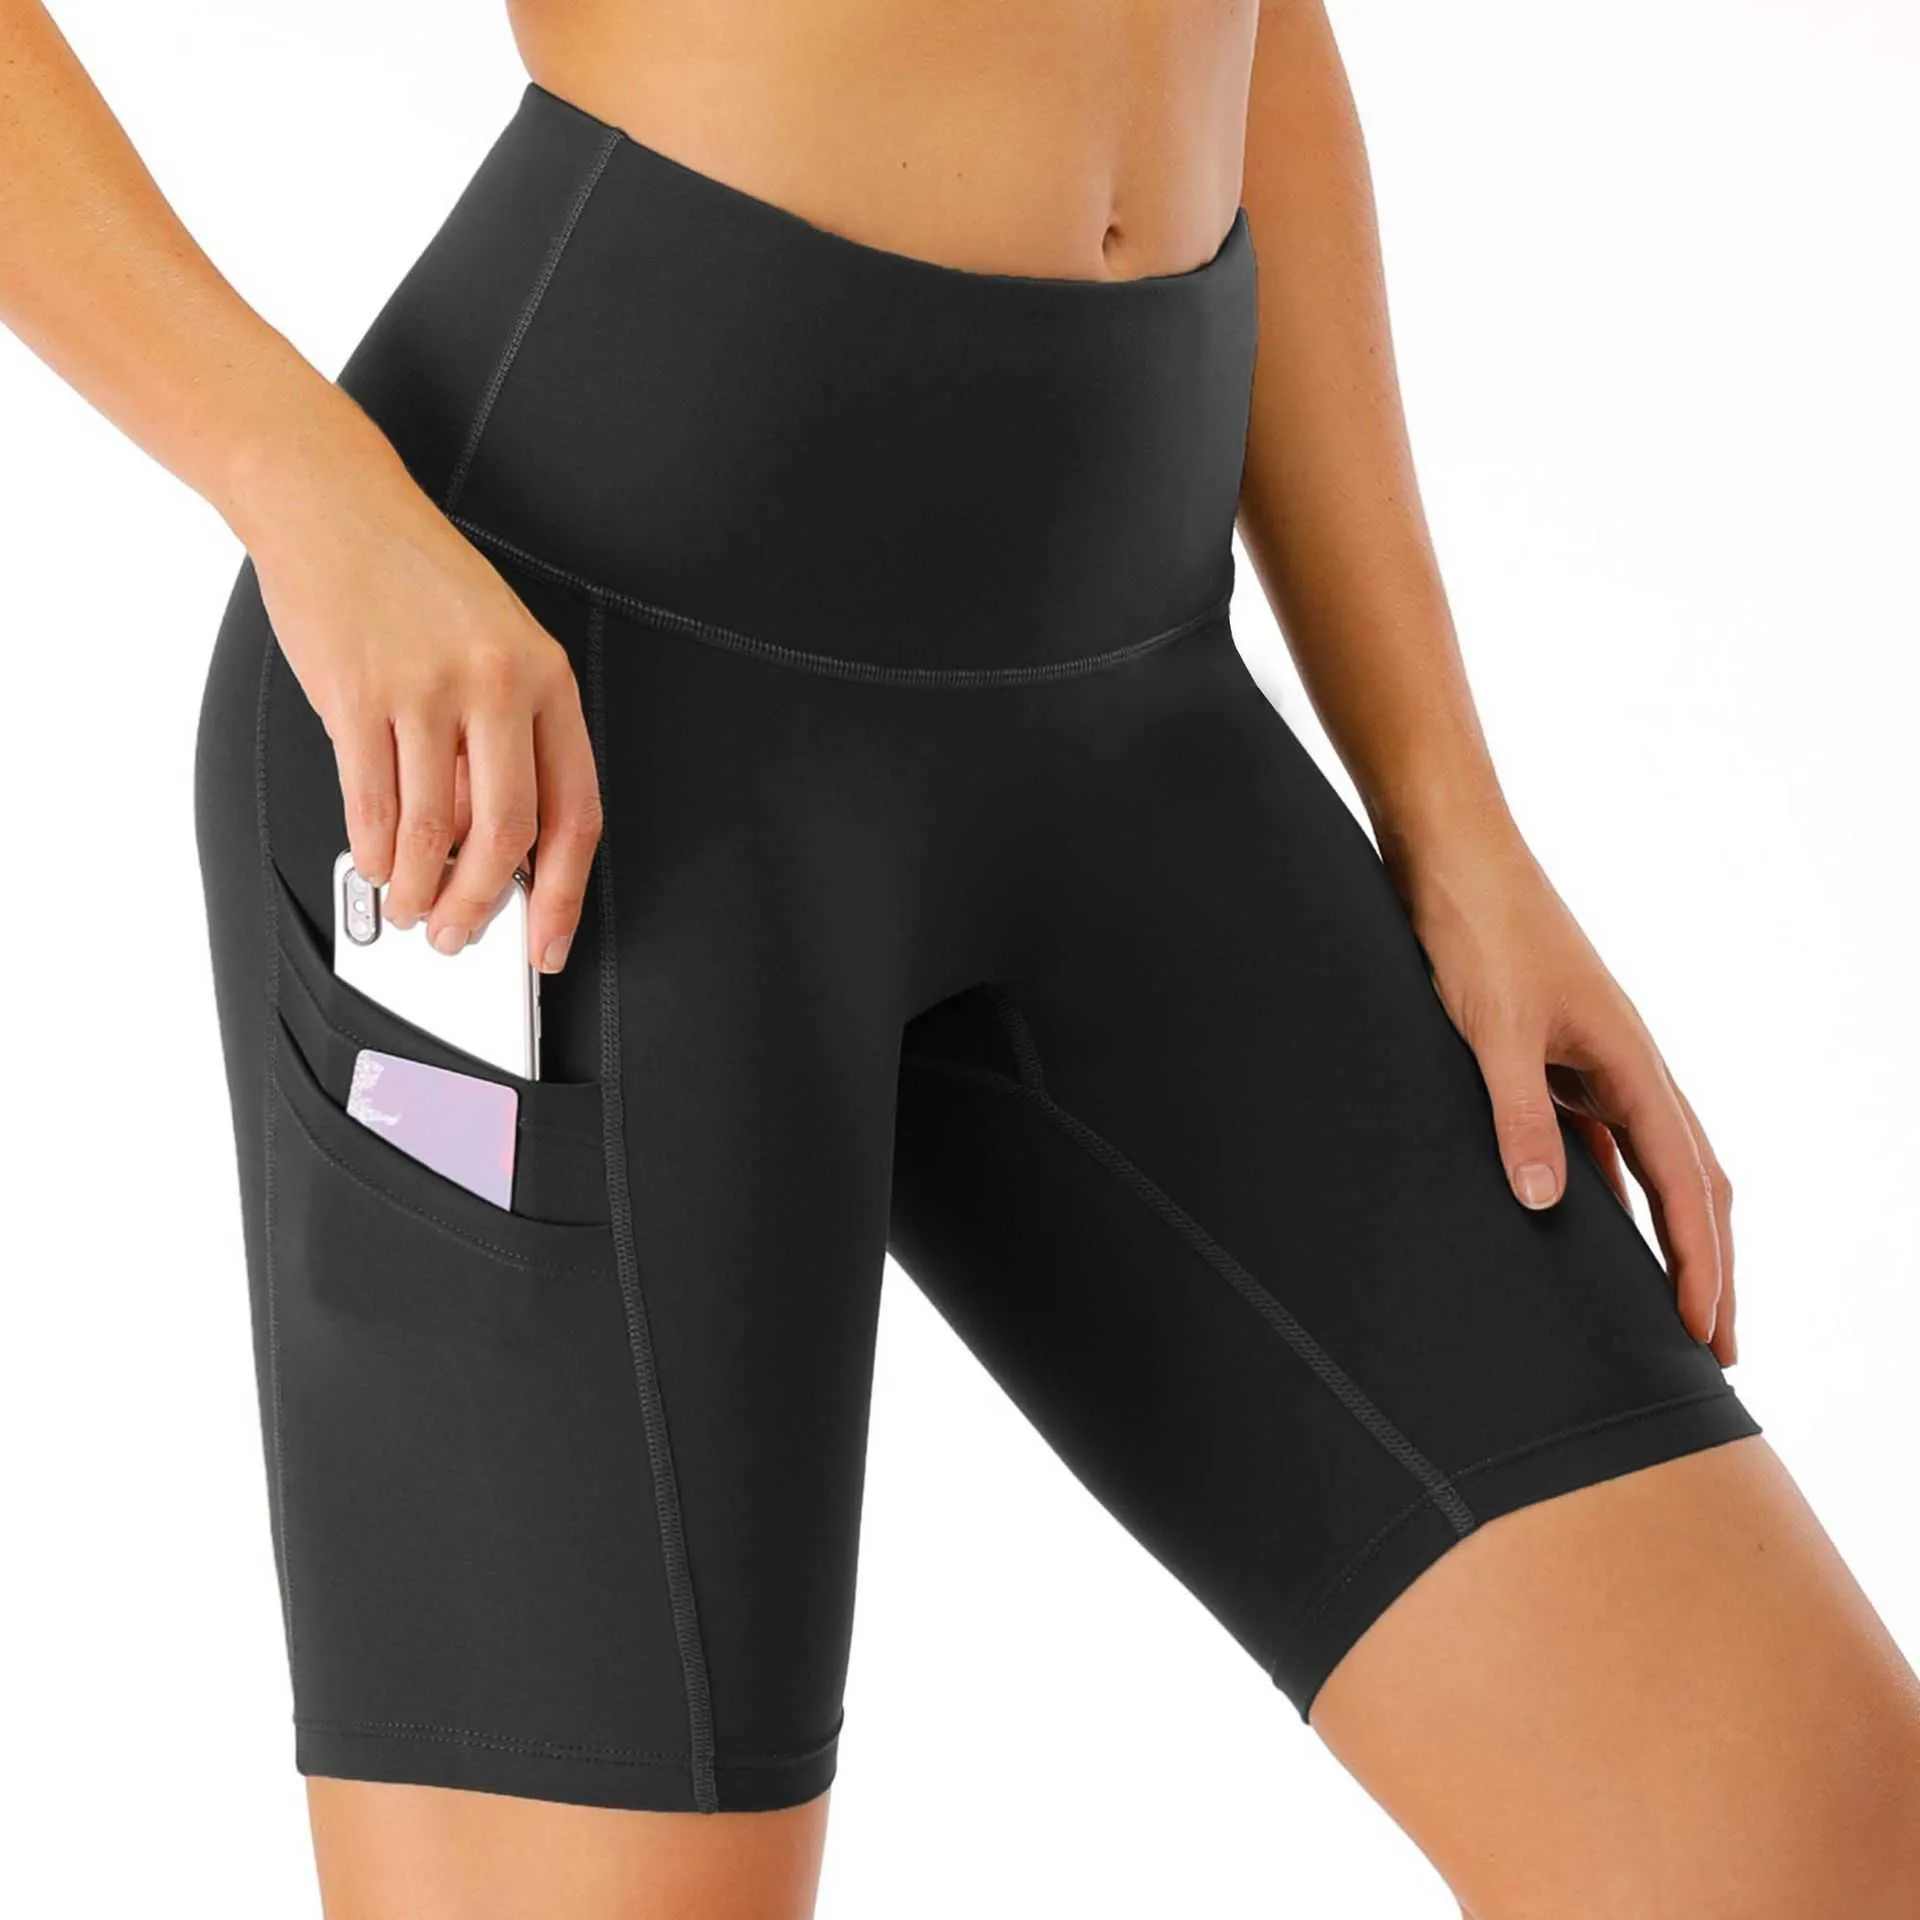 Yoga Outfits Shorts Fitness Sports Leggings Tight High Waist Elastic Side Pockets Gym Clothes Women Underwears Running Exercise Pants